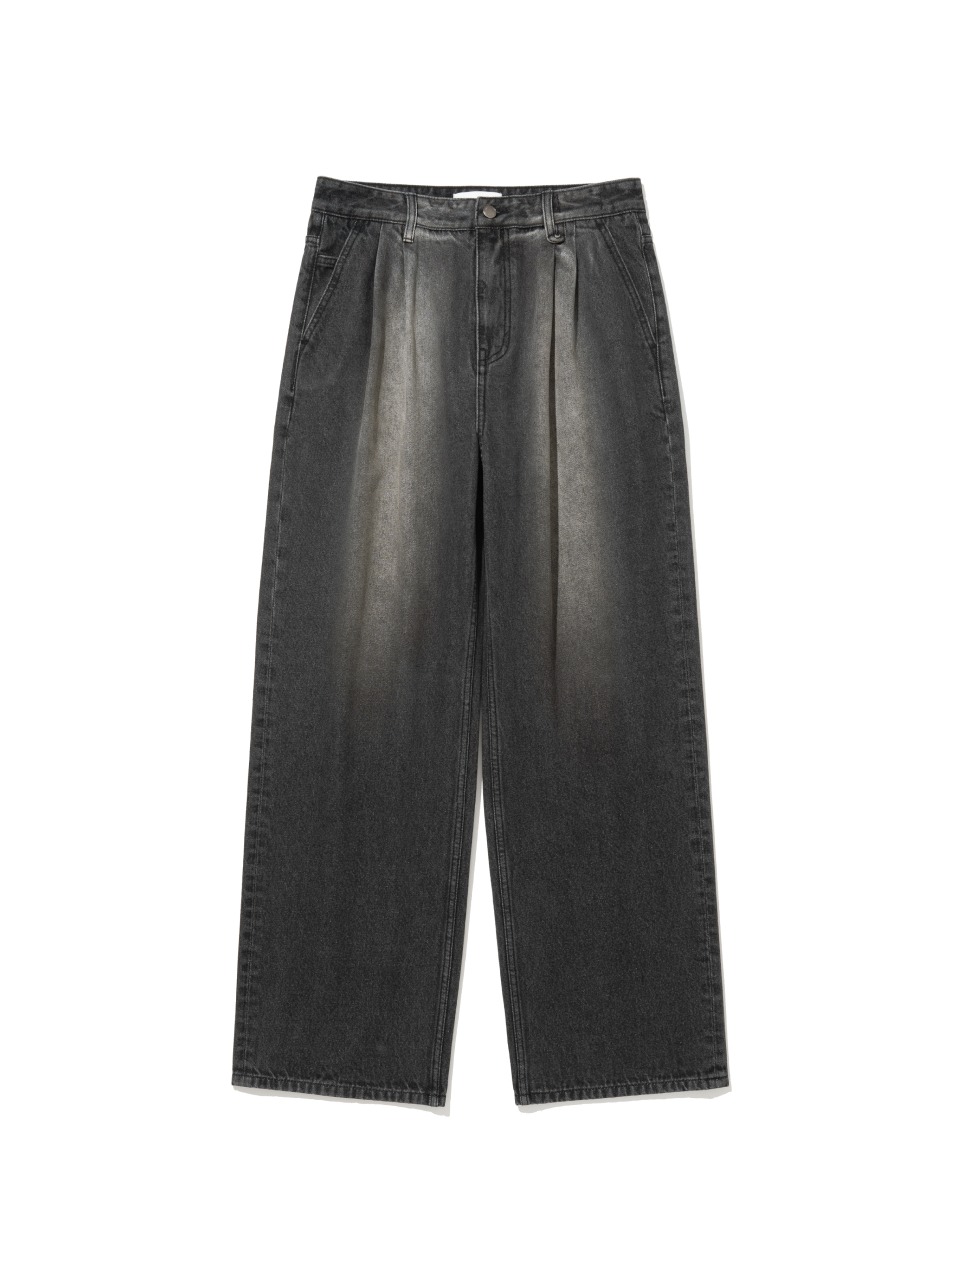 FOTTNERS - TWO TUCK WIDE WASHED JEANS (BLACK)